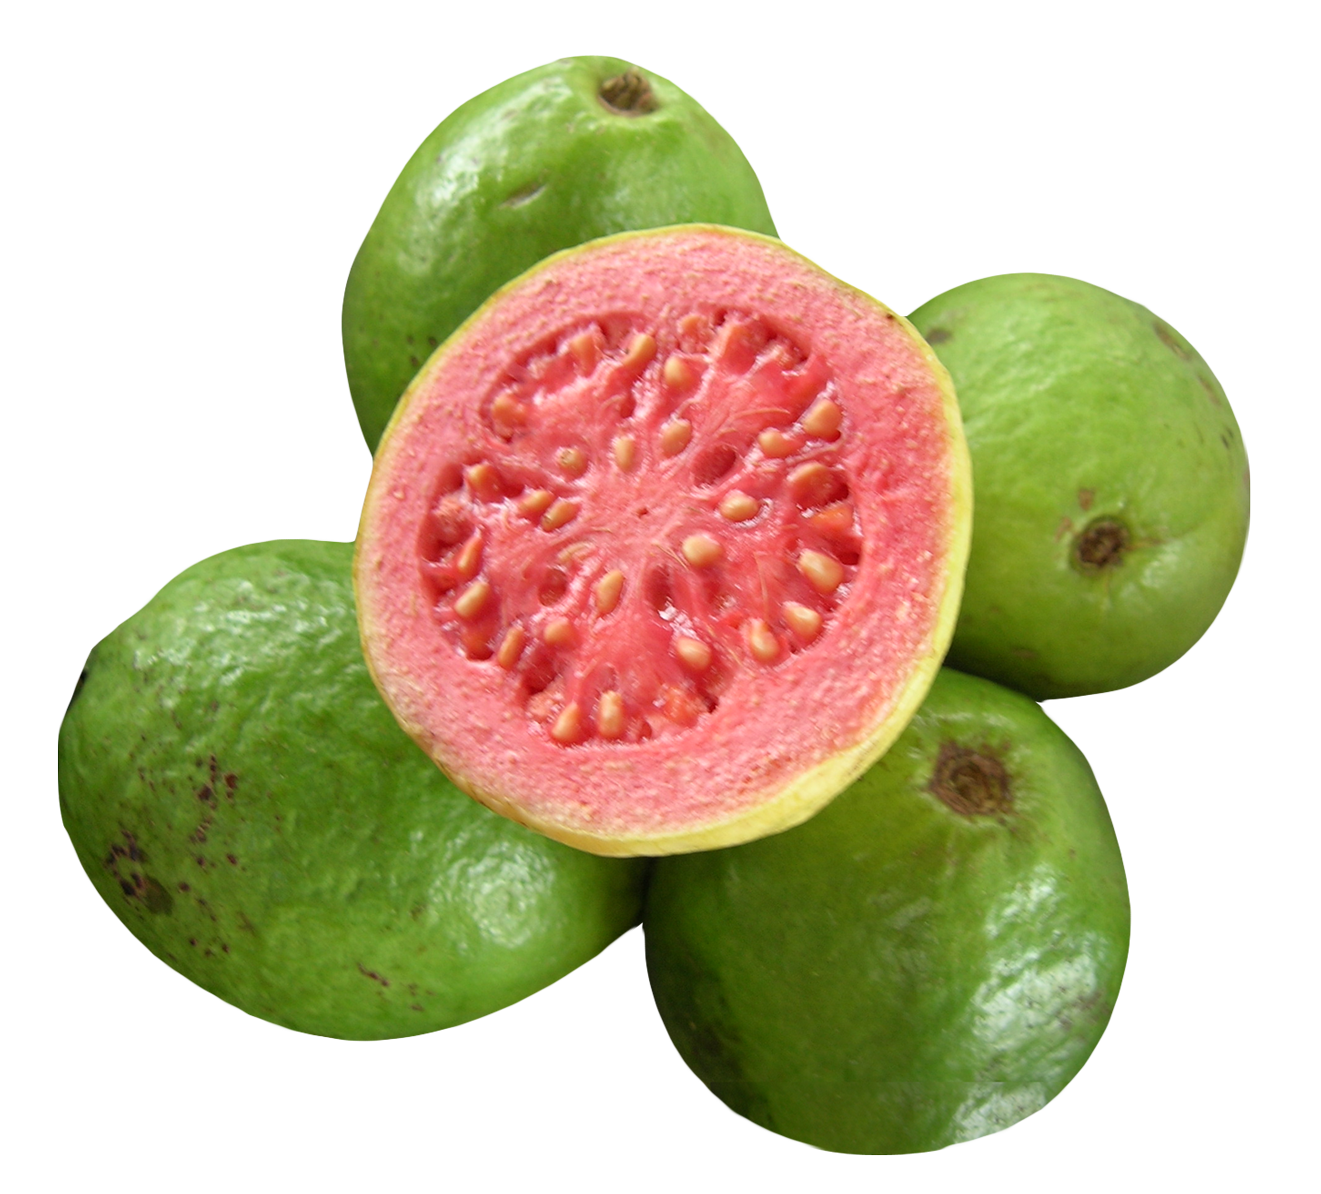 Not Apple, GUAVA will keep th